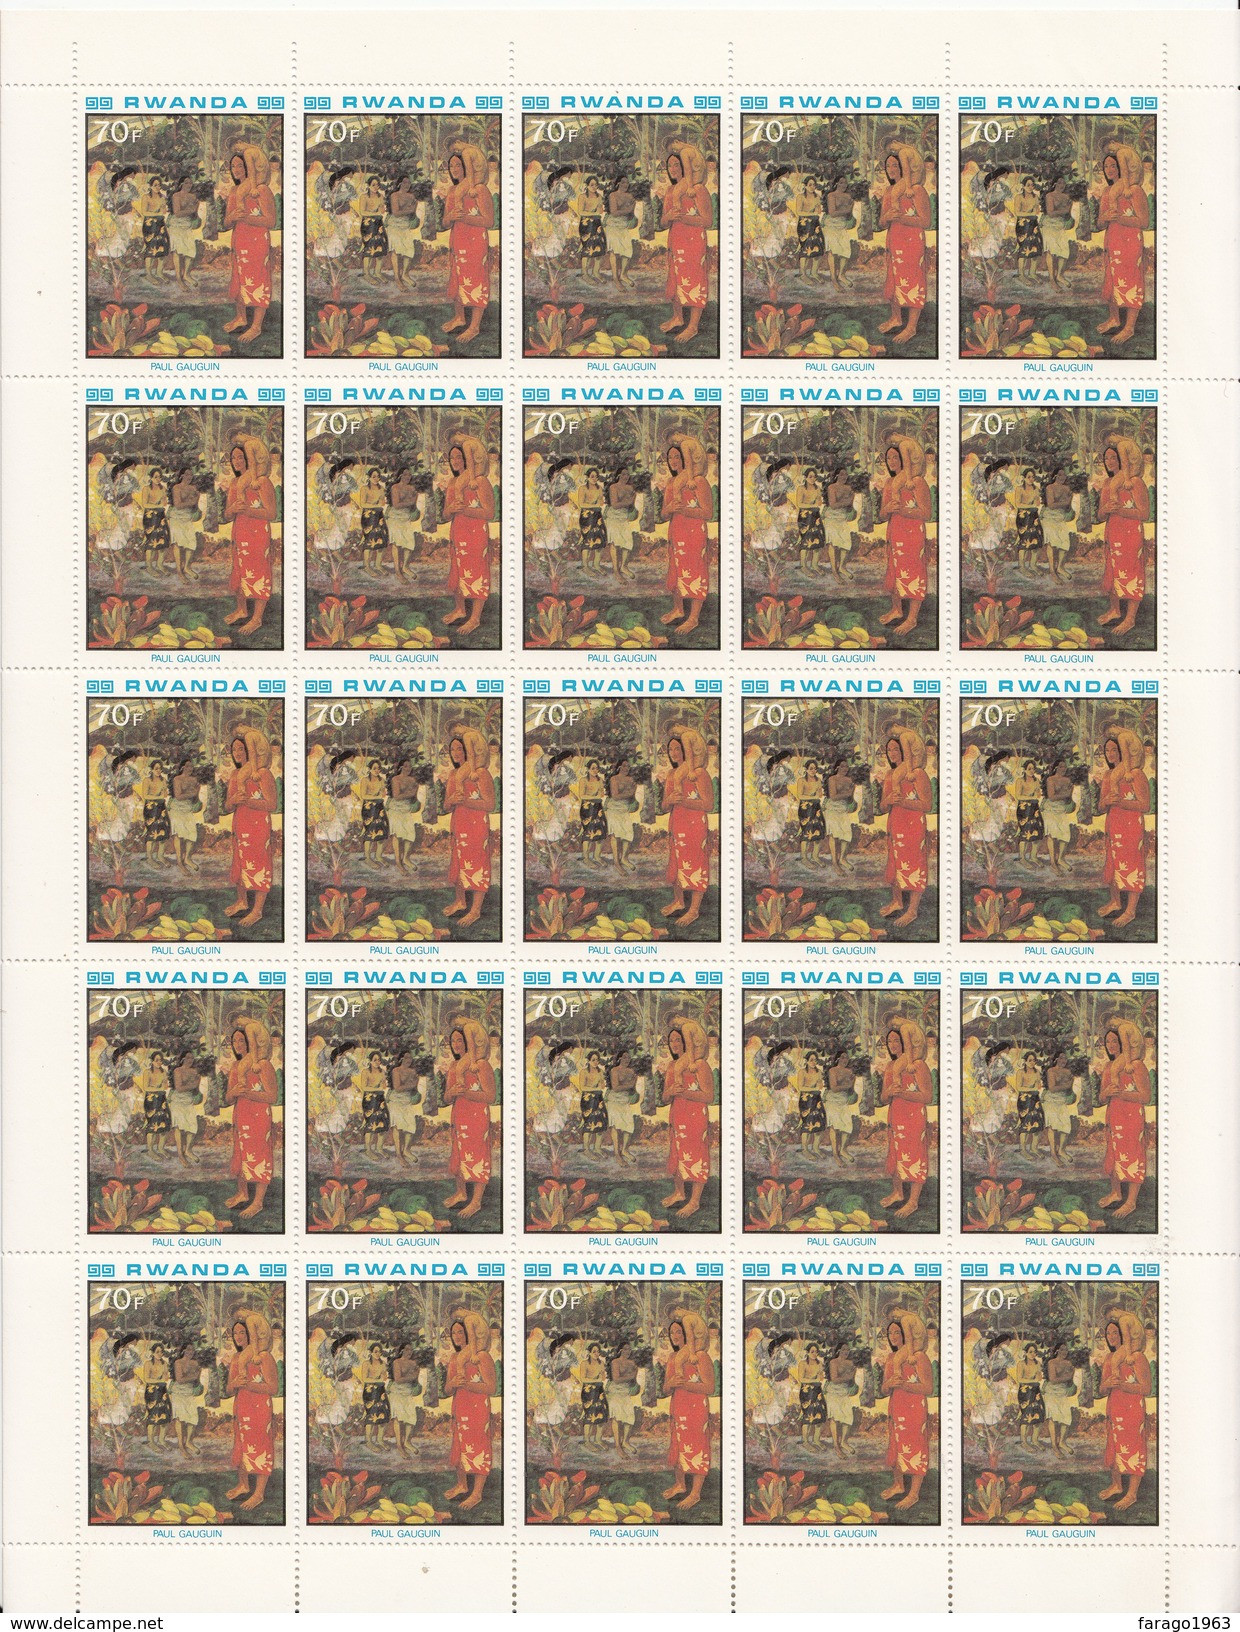 1980 Rwanda 70F Gauguin "Tahaitian Women" Painting Complete Sheet Of 25 MNH  SUPER CHEAP Not In Every Collection - Impresionismo